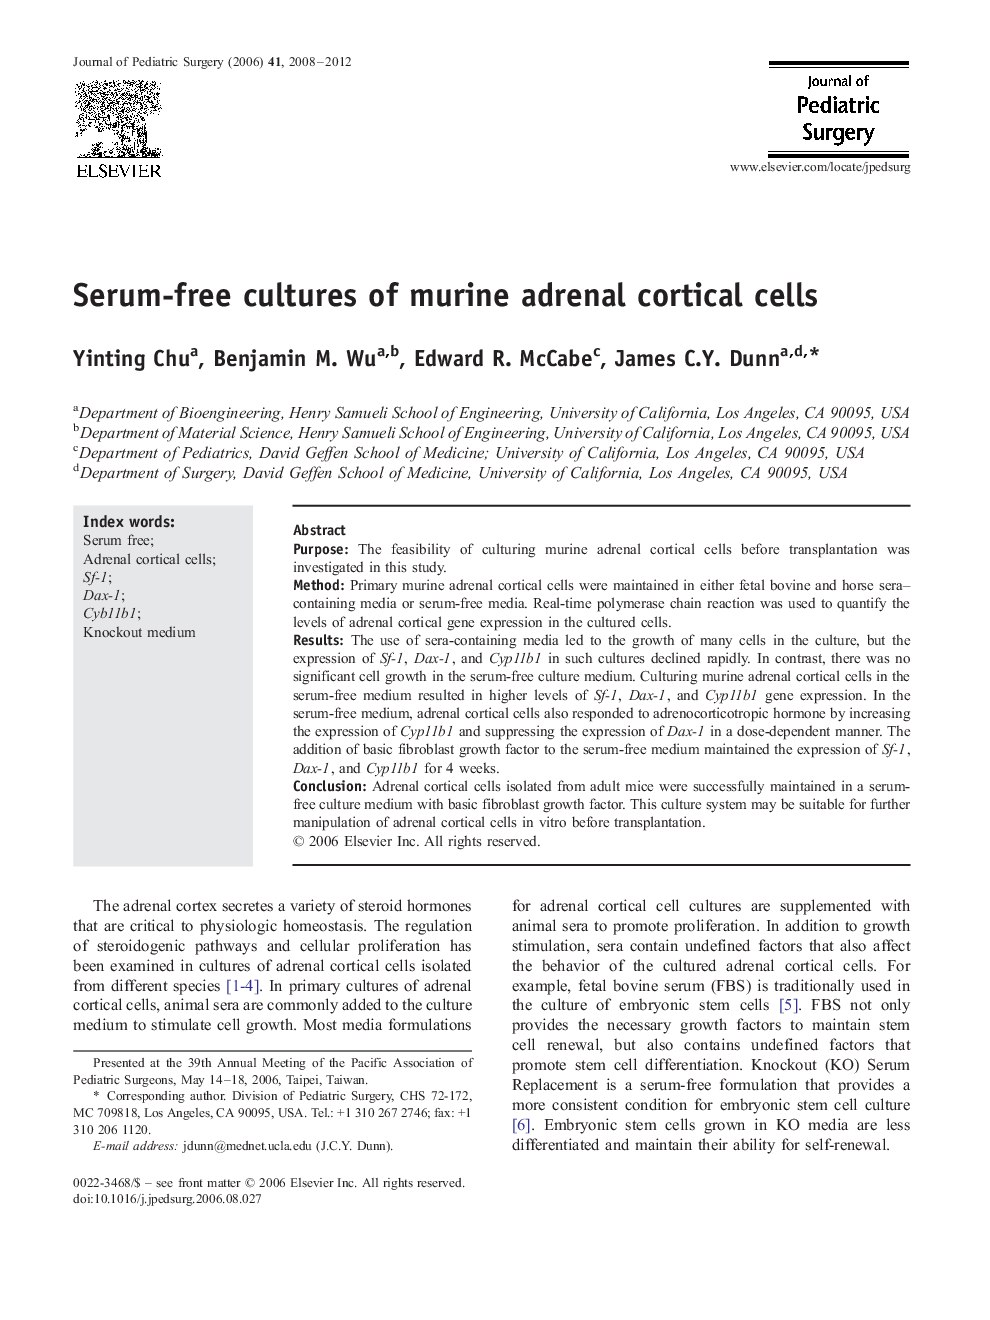 Serum-free cultures of murine adrenal cortical cells 